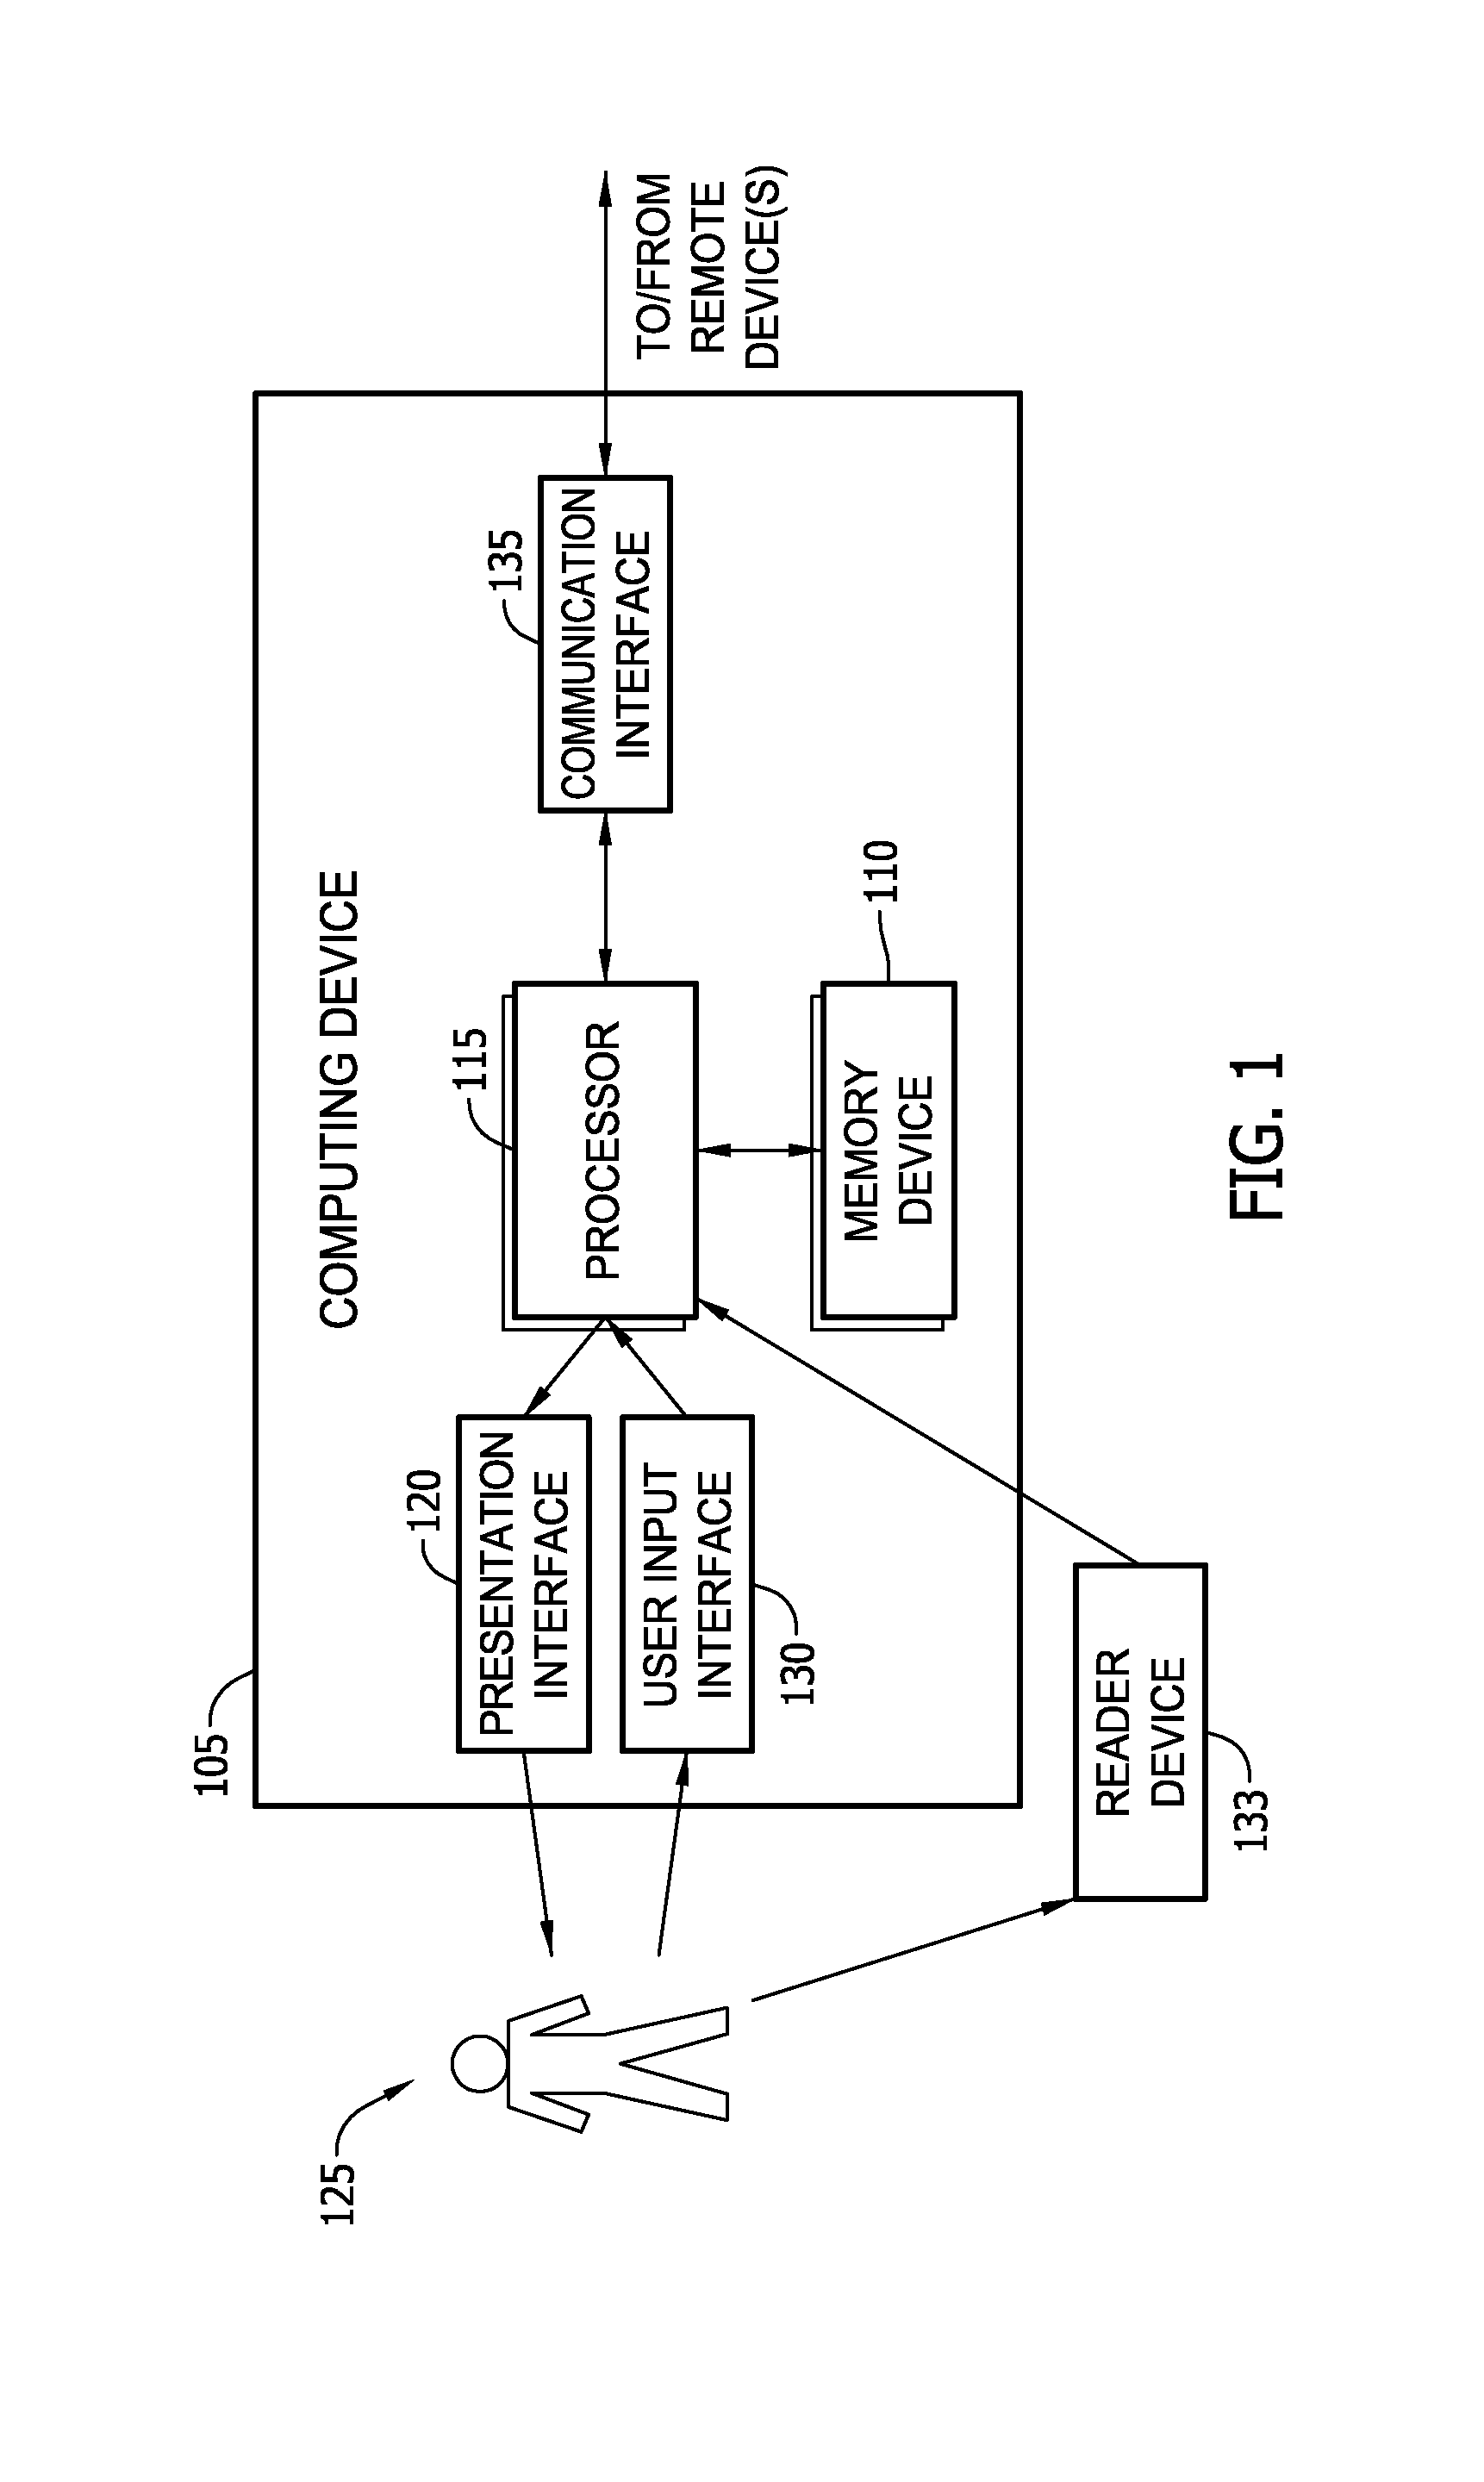 Method and system for use in facilitating patch change management of industrial control systems